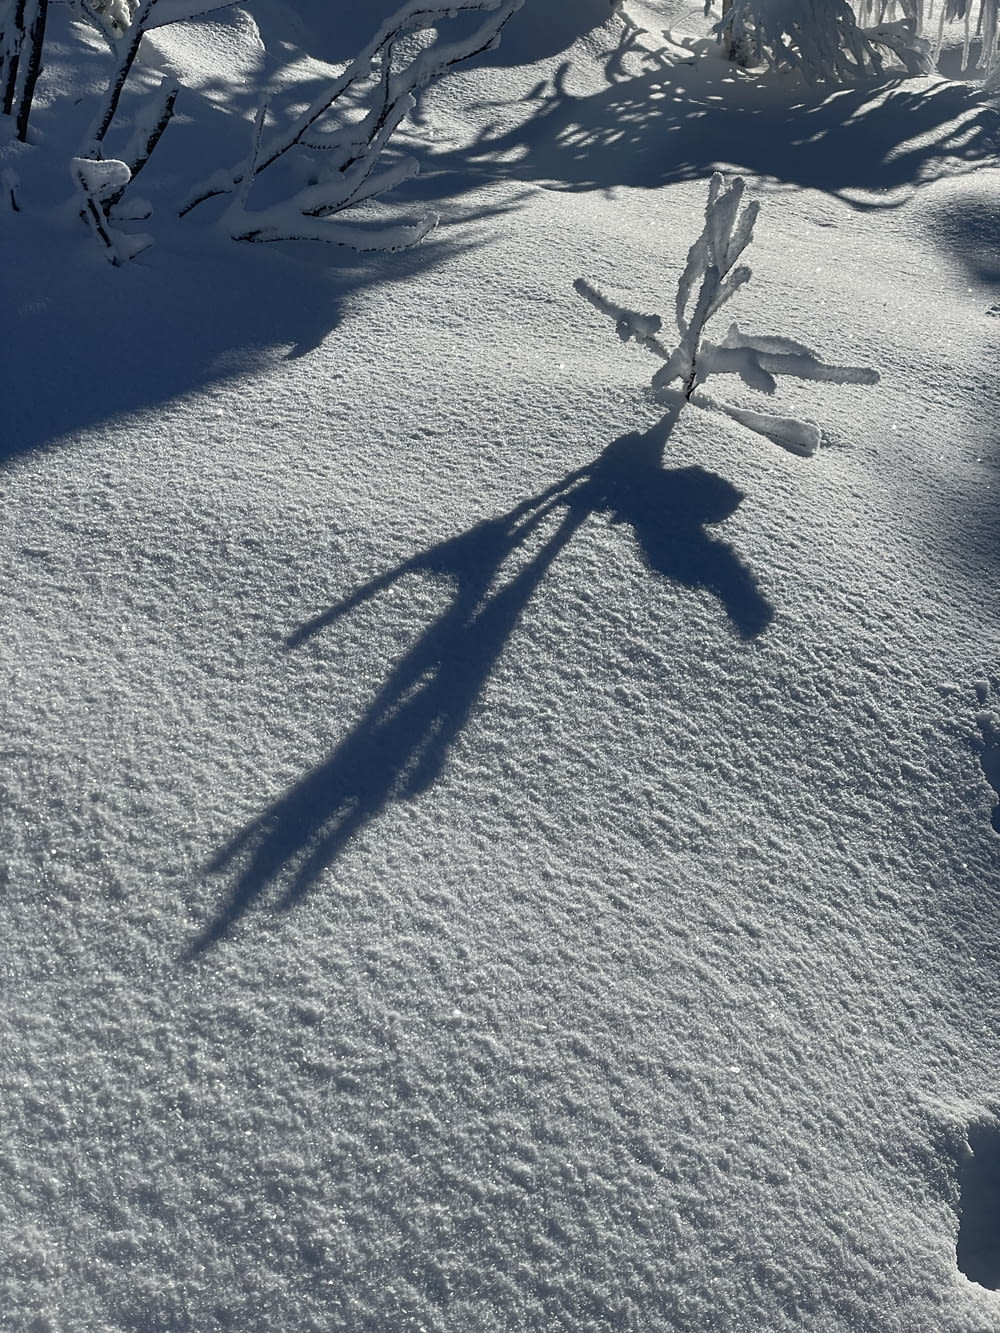 the shadow of a person on skis in the snow